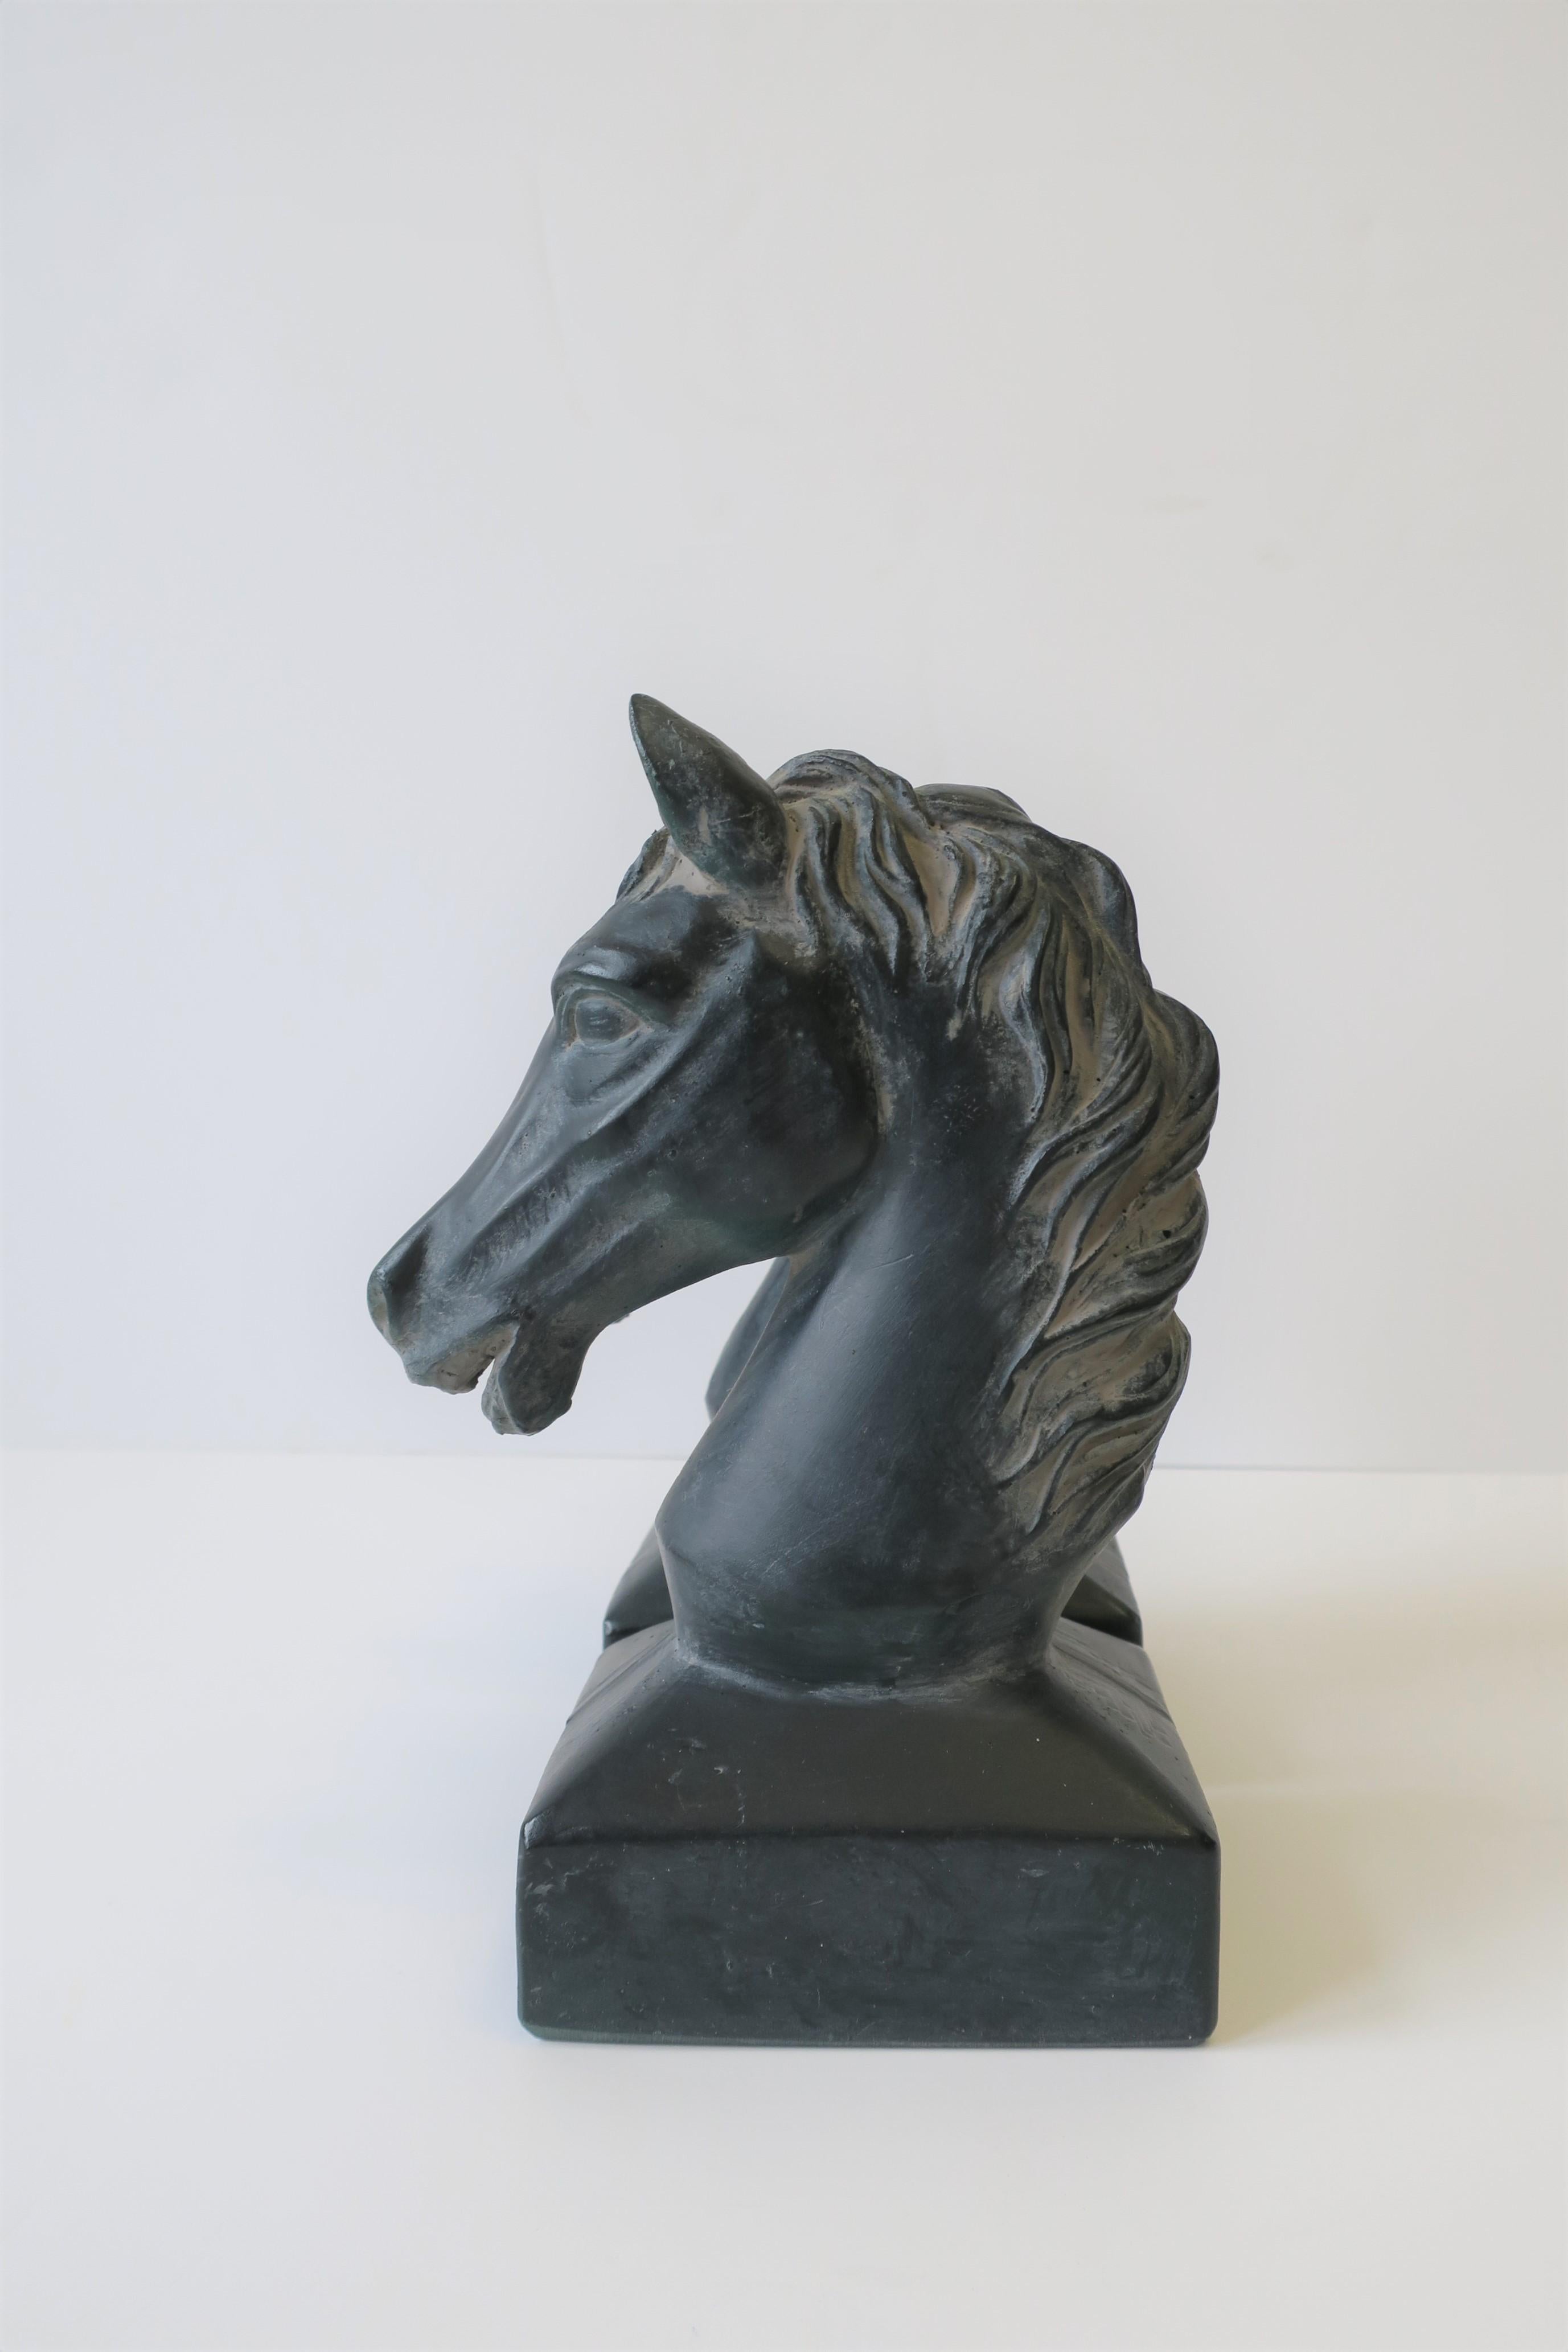 20th Century Pair of Vintage Horse or Equine Bookends